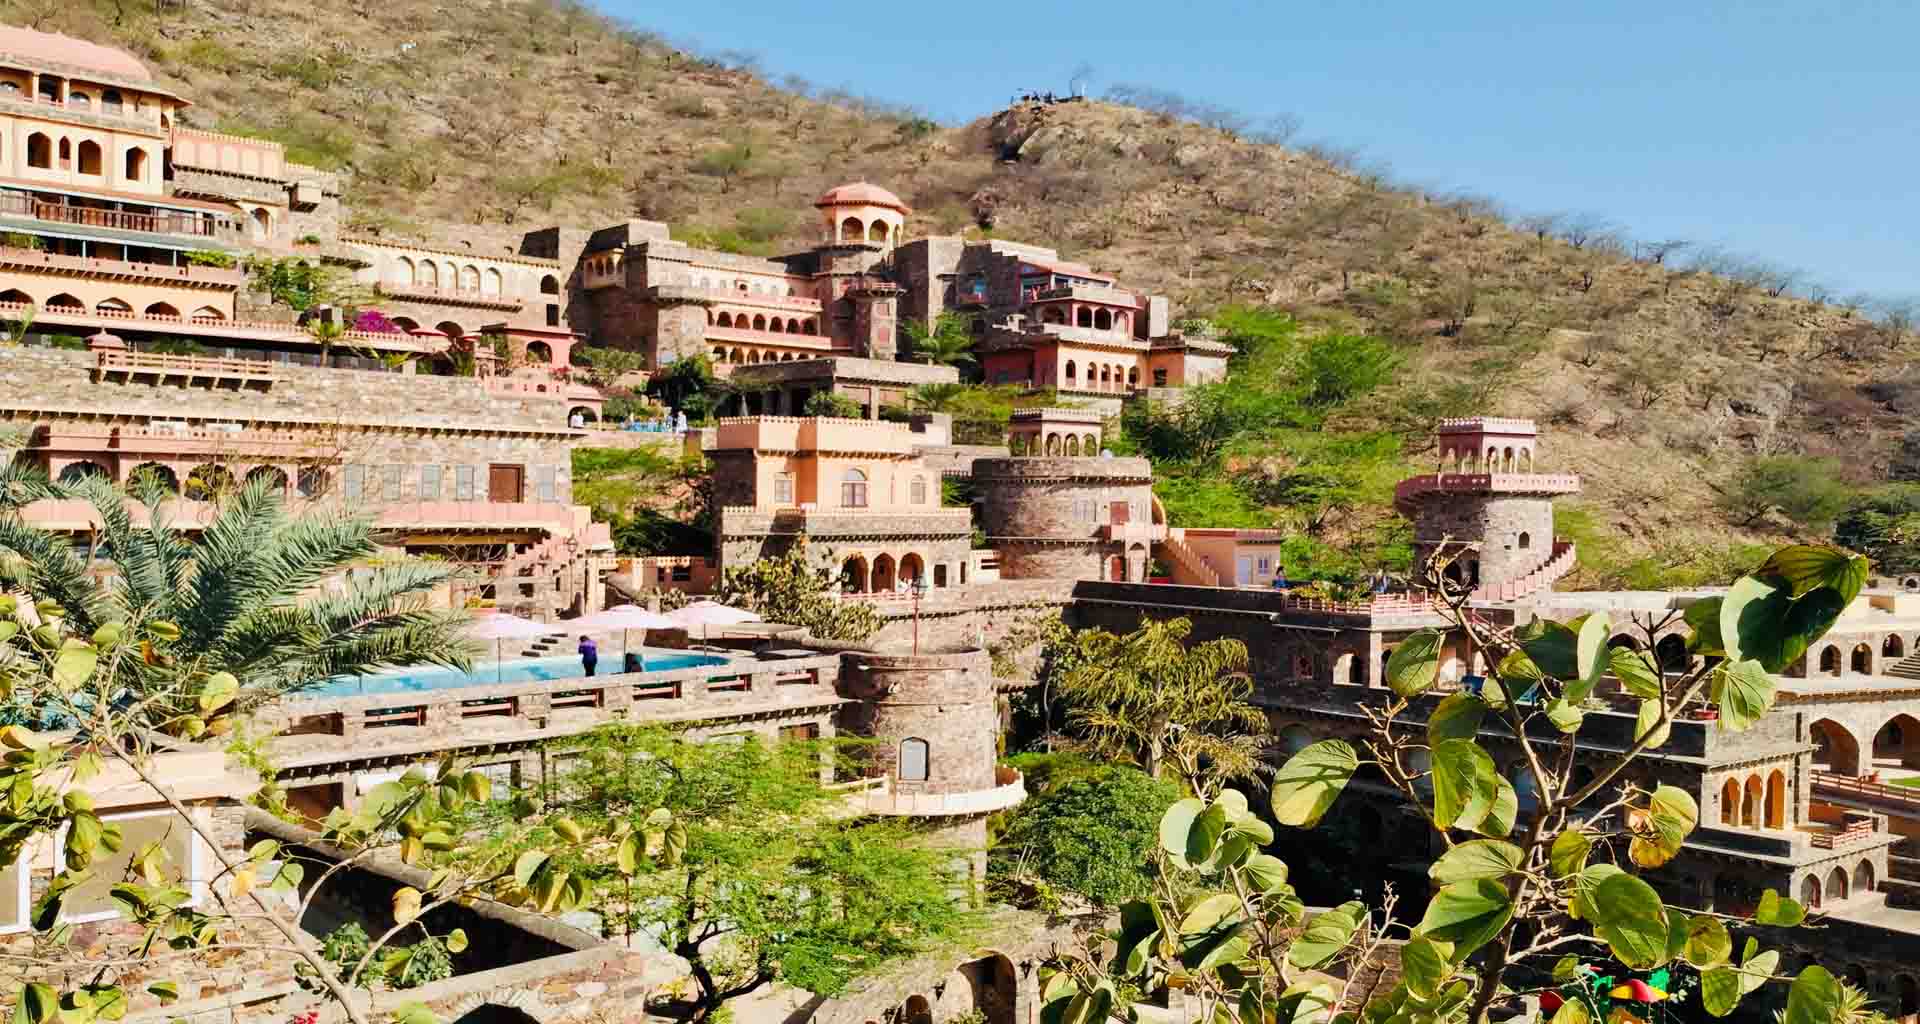 Citadel Rajasthan With Architectural Wonders And The Ganges 